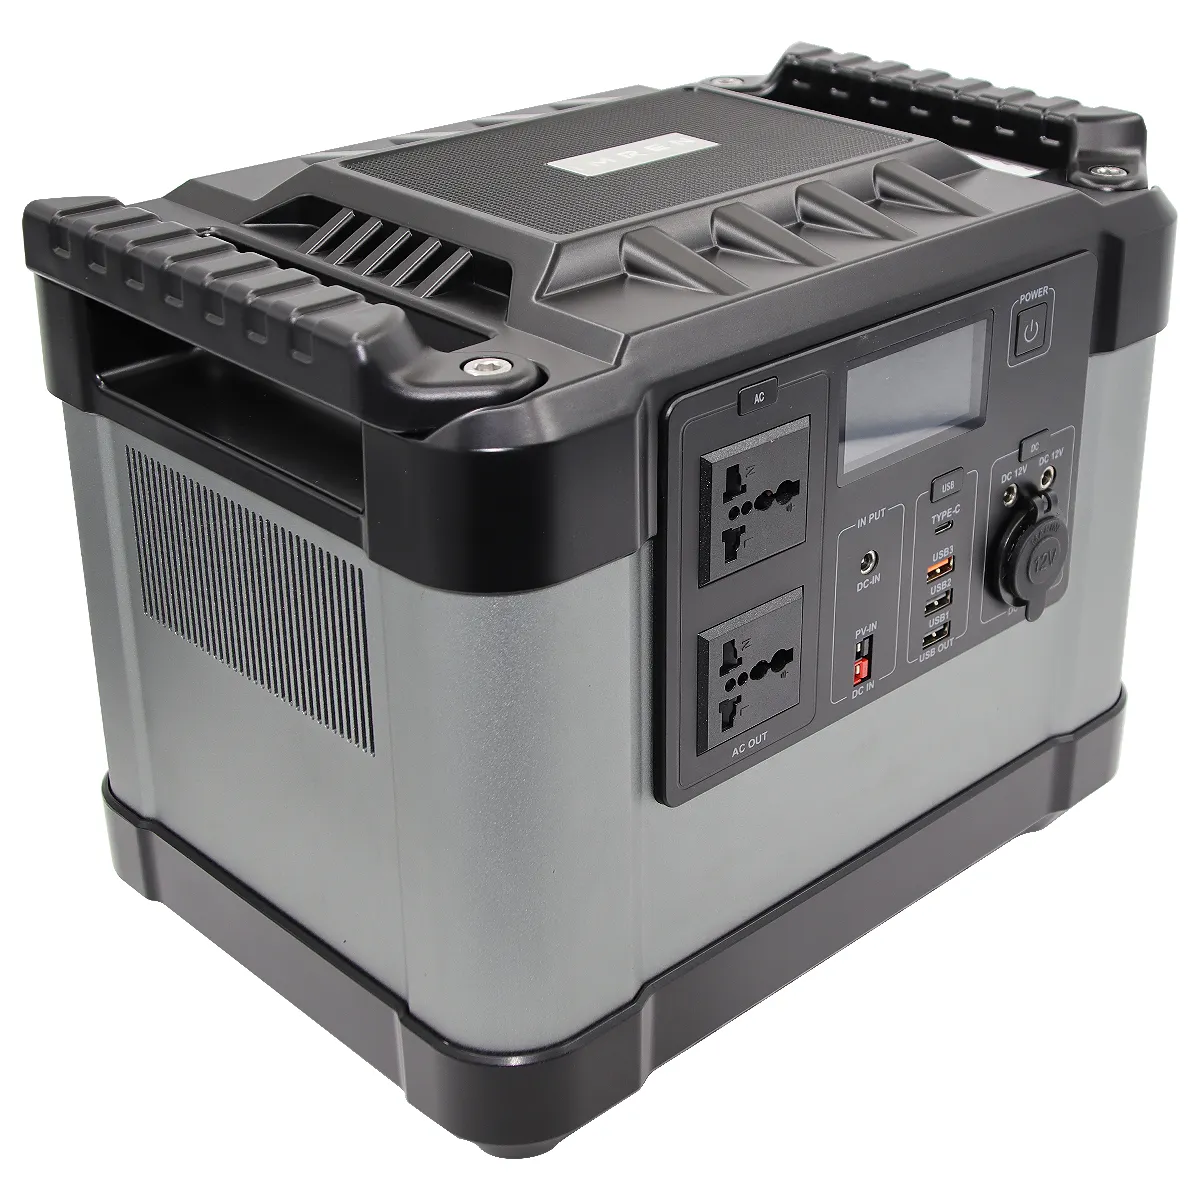 Power Storage lithium iron battery High Performance Large Capacity 1000W Portable Power Station Emergency Power Supply